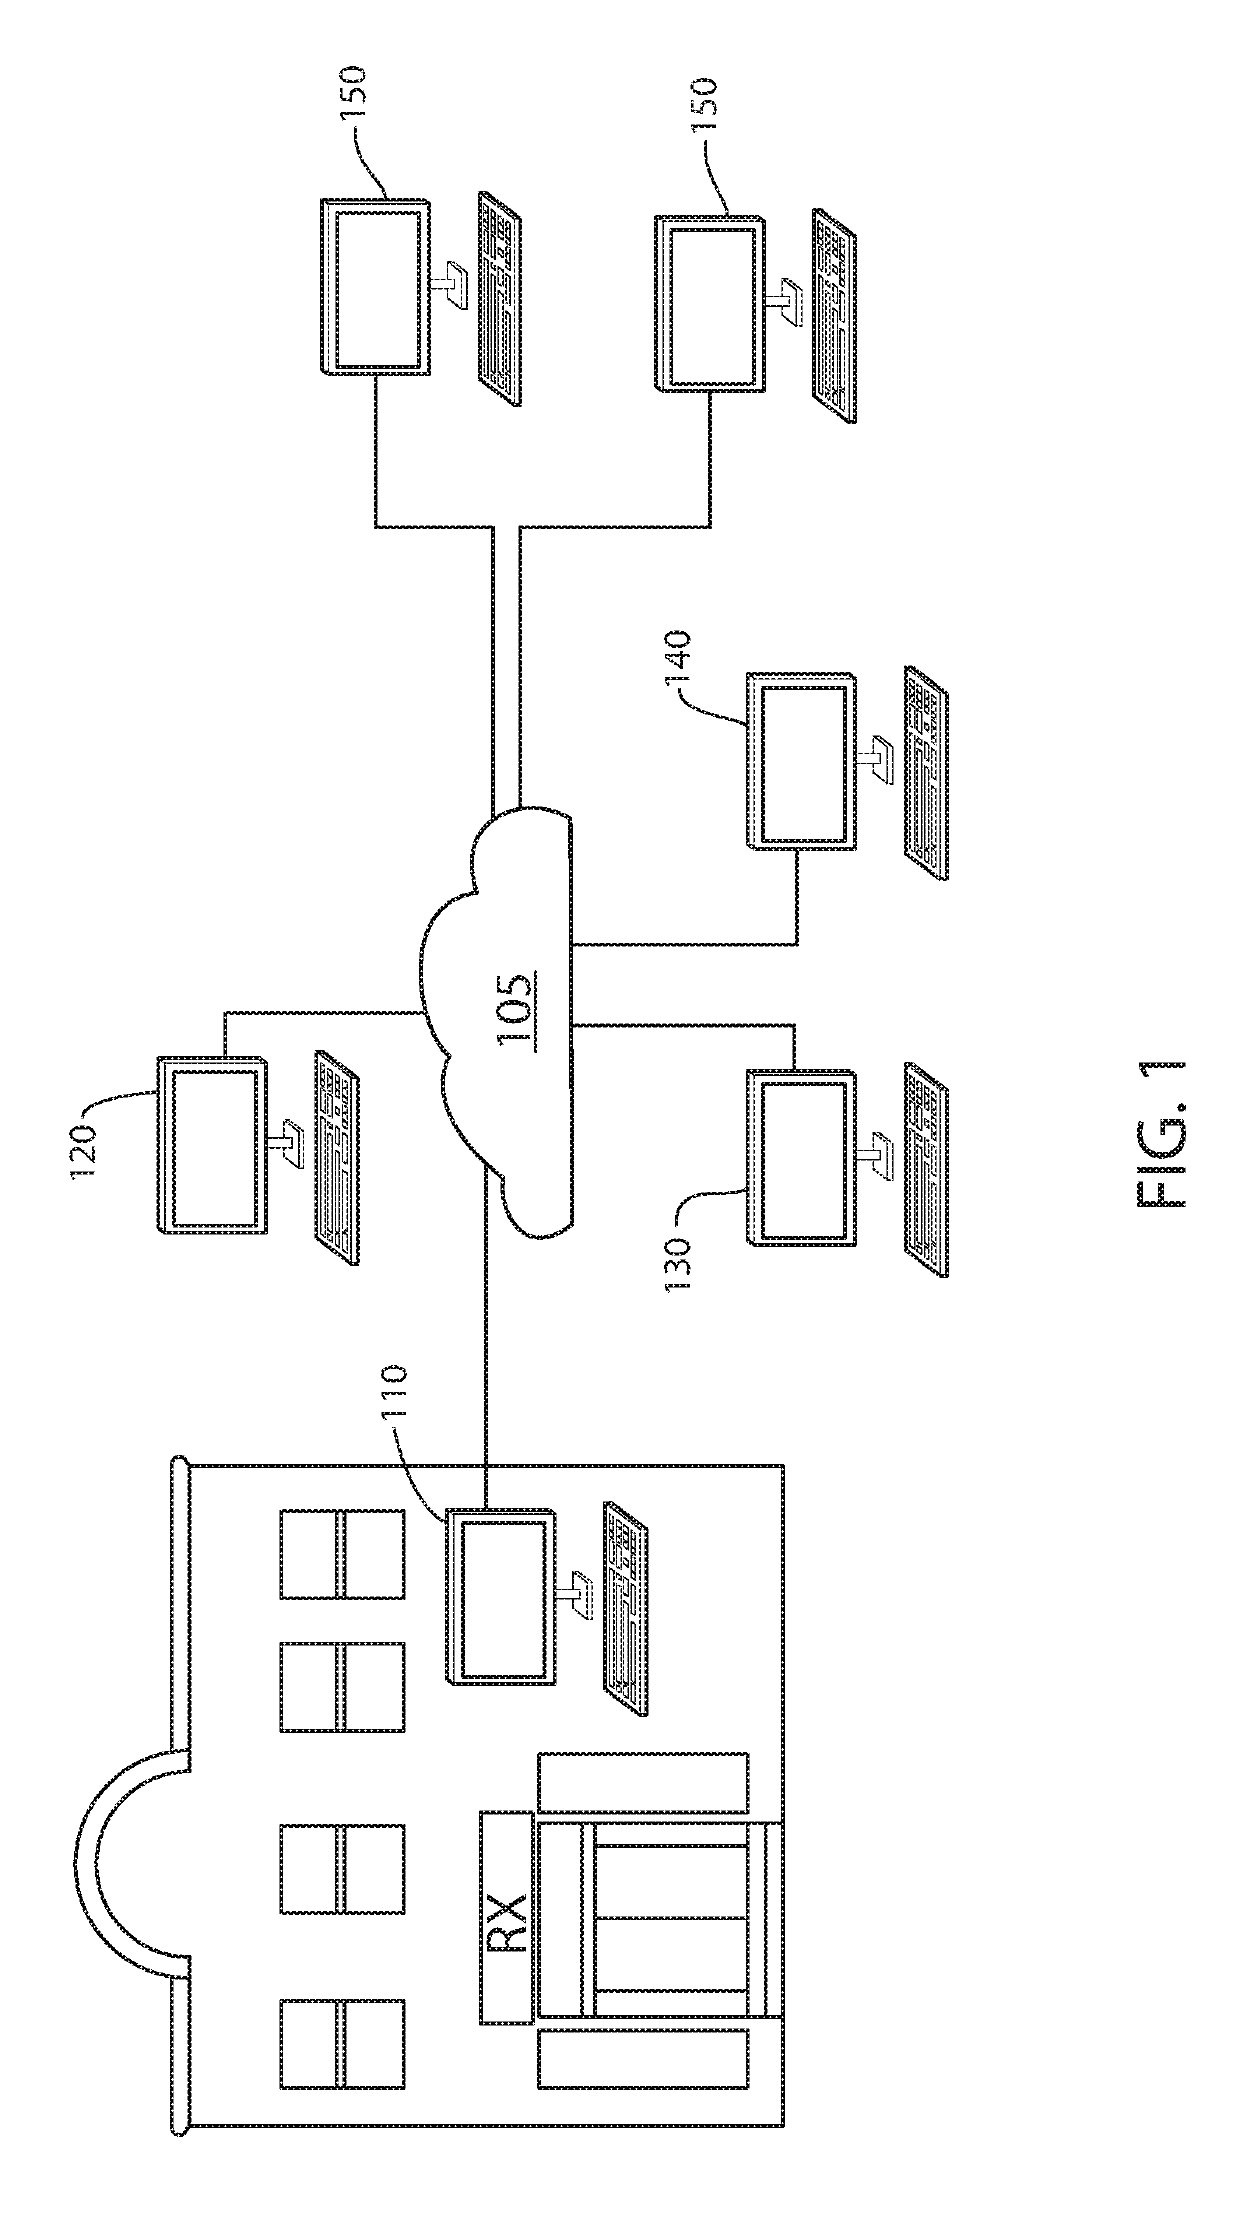 System and Method for Processing and Adjudicating Coupons